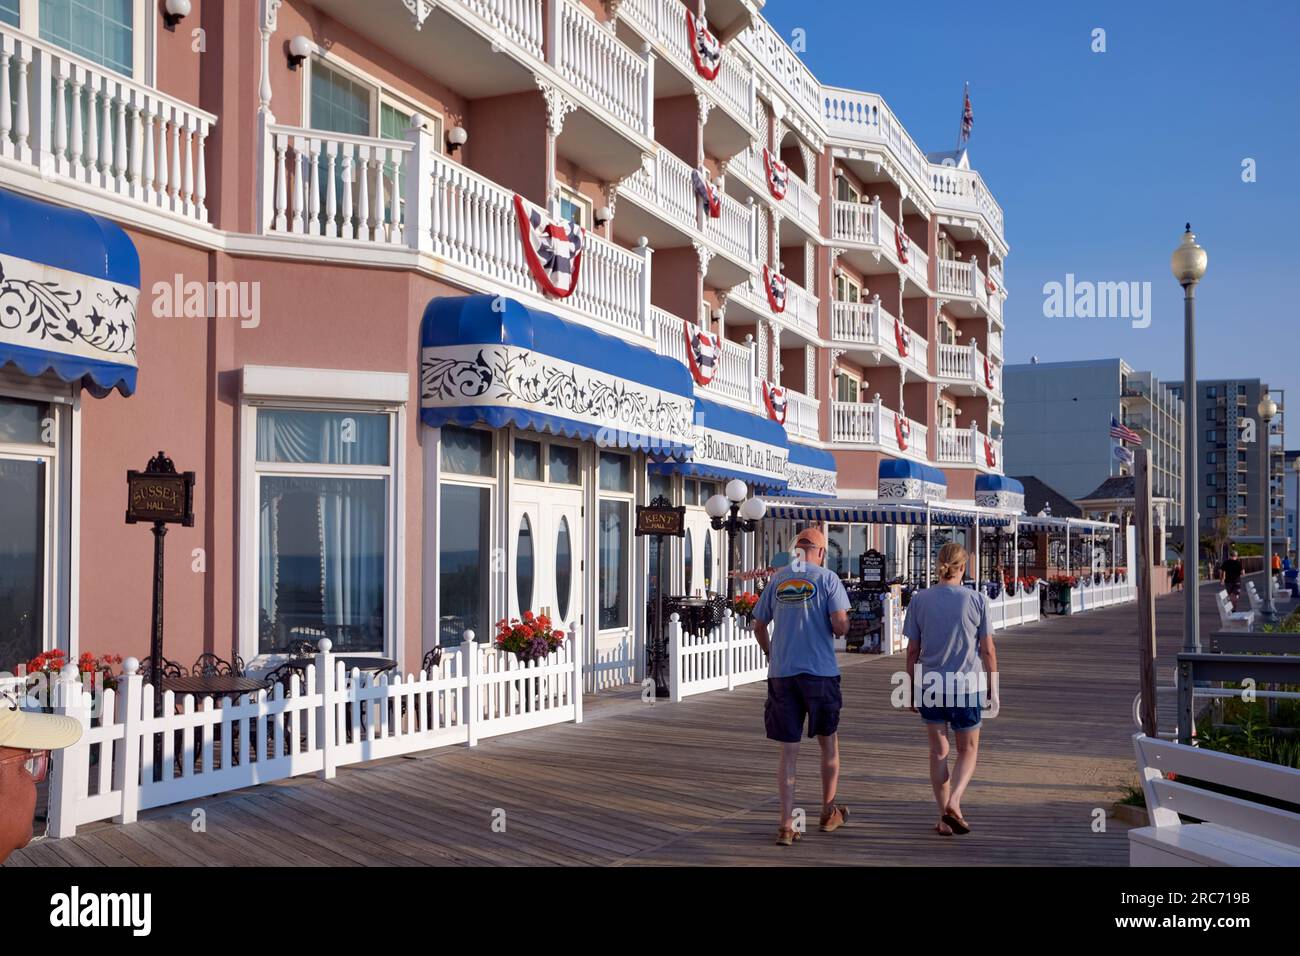 View of local architecture along the boardwalk at Rehoboth Beach, Delaware USA. Stock Photo